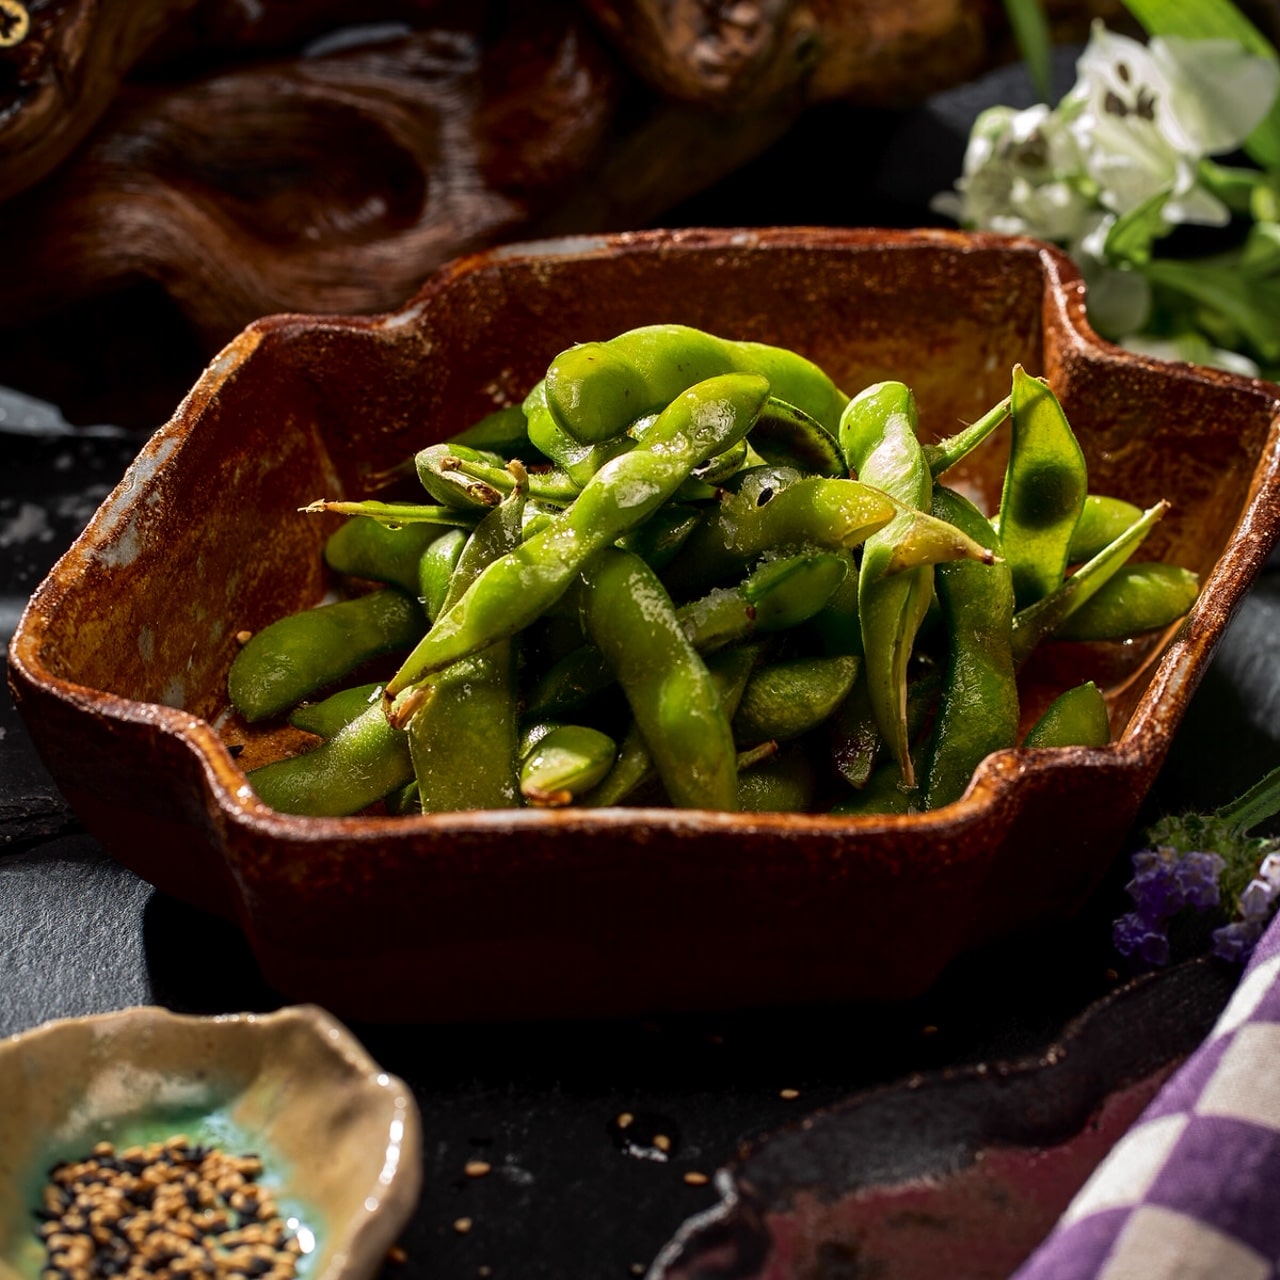 Edamame in pod with a pinch of salt